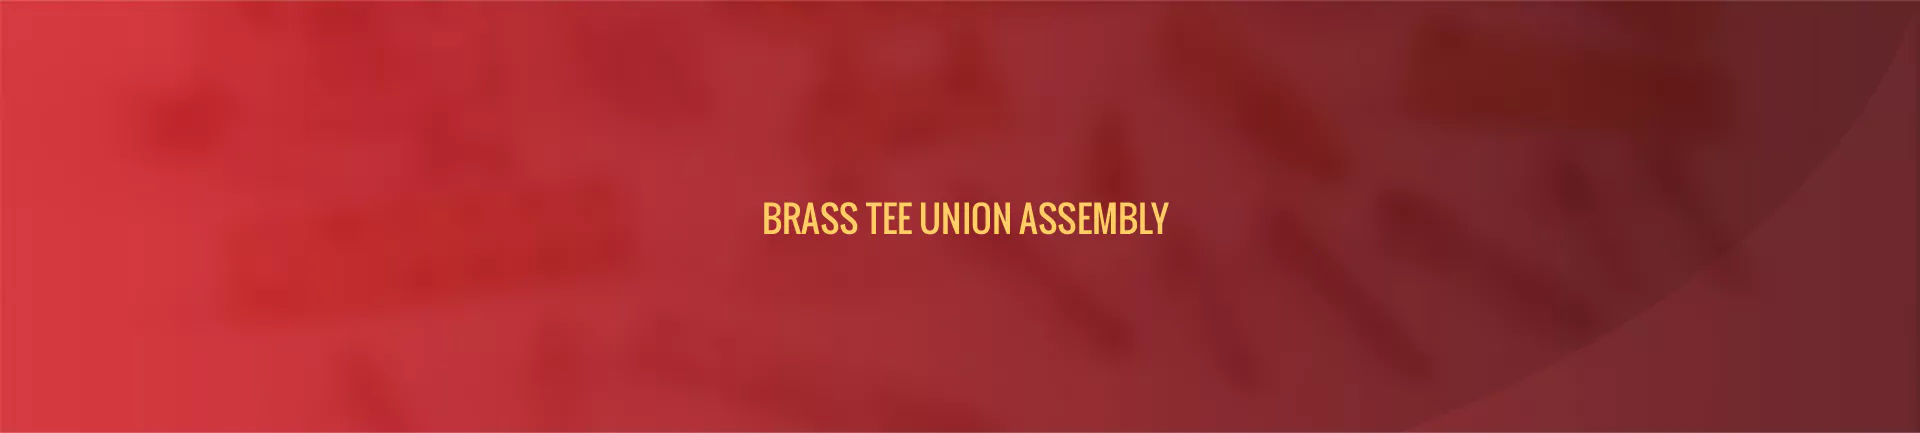 brass_tee_union_assembly-banner